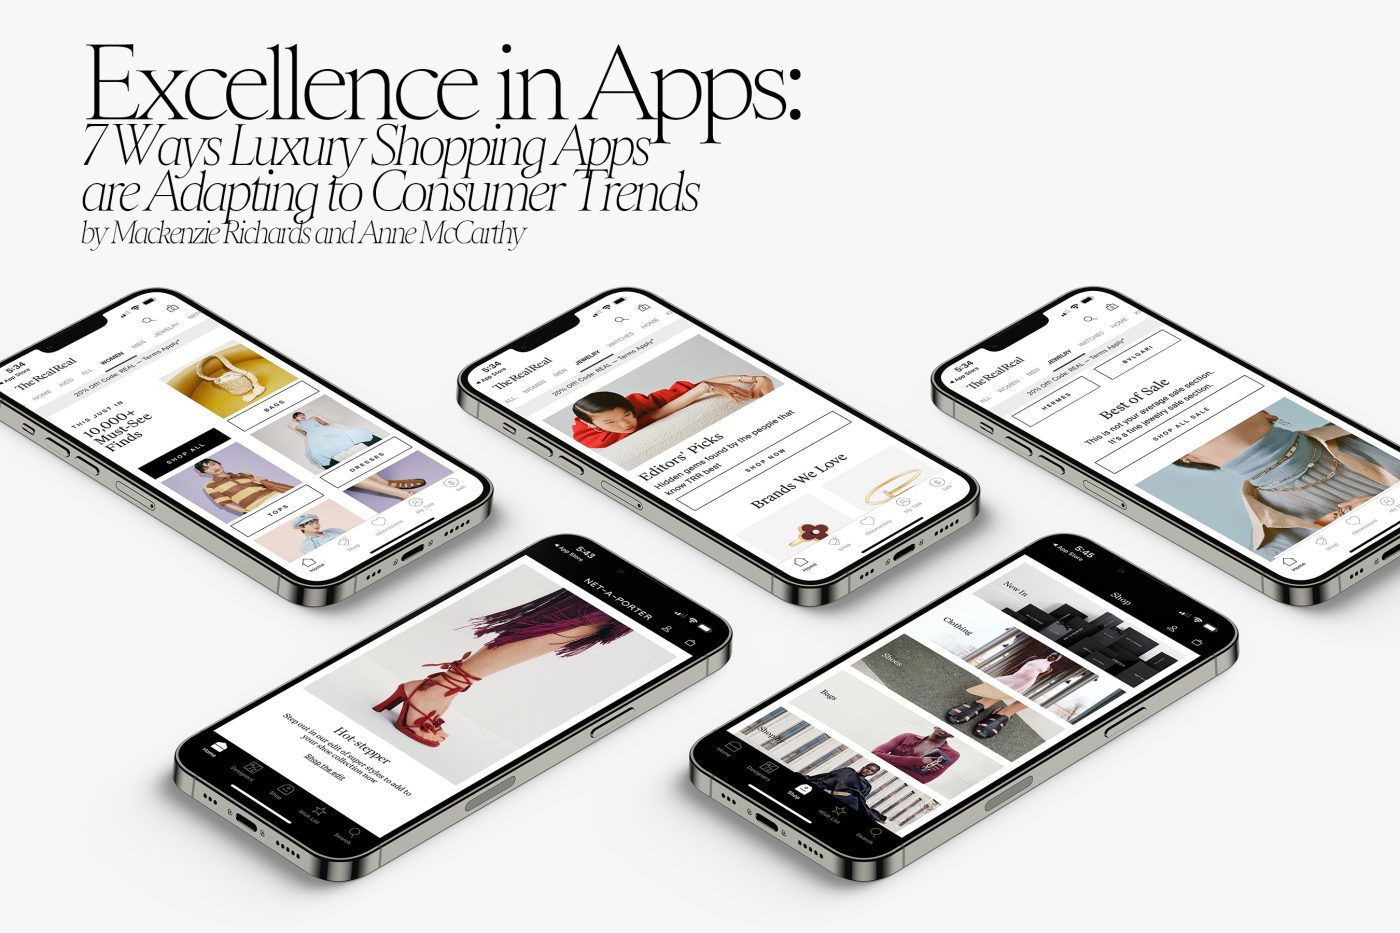 Excellent I Apps Insights article with iPhones and screenshot images of Harrods, The Real Real and more